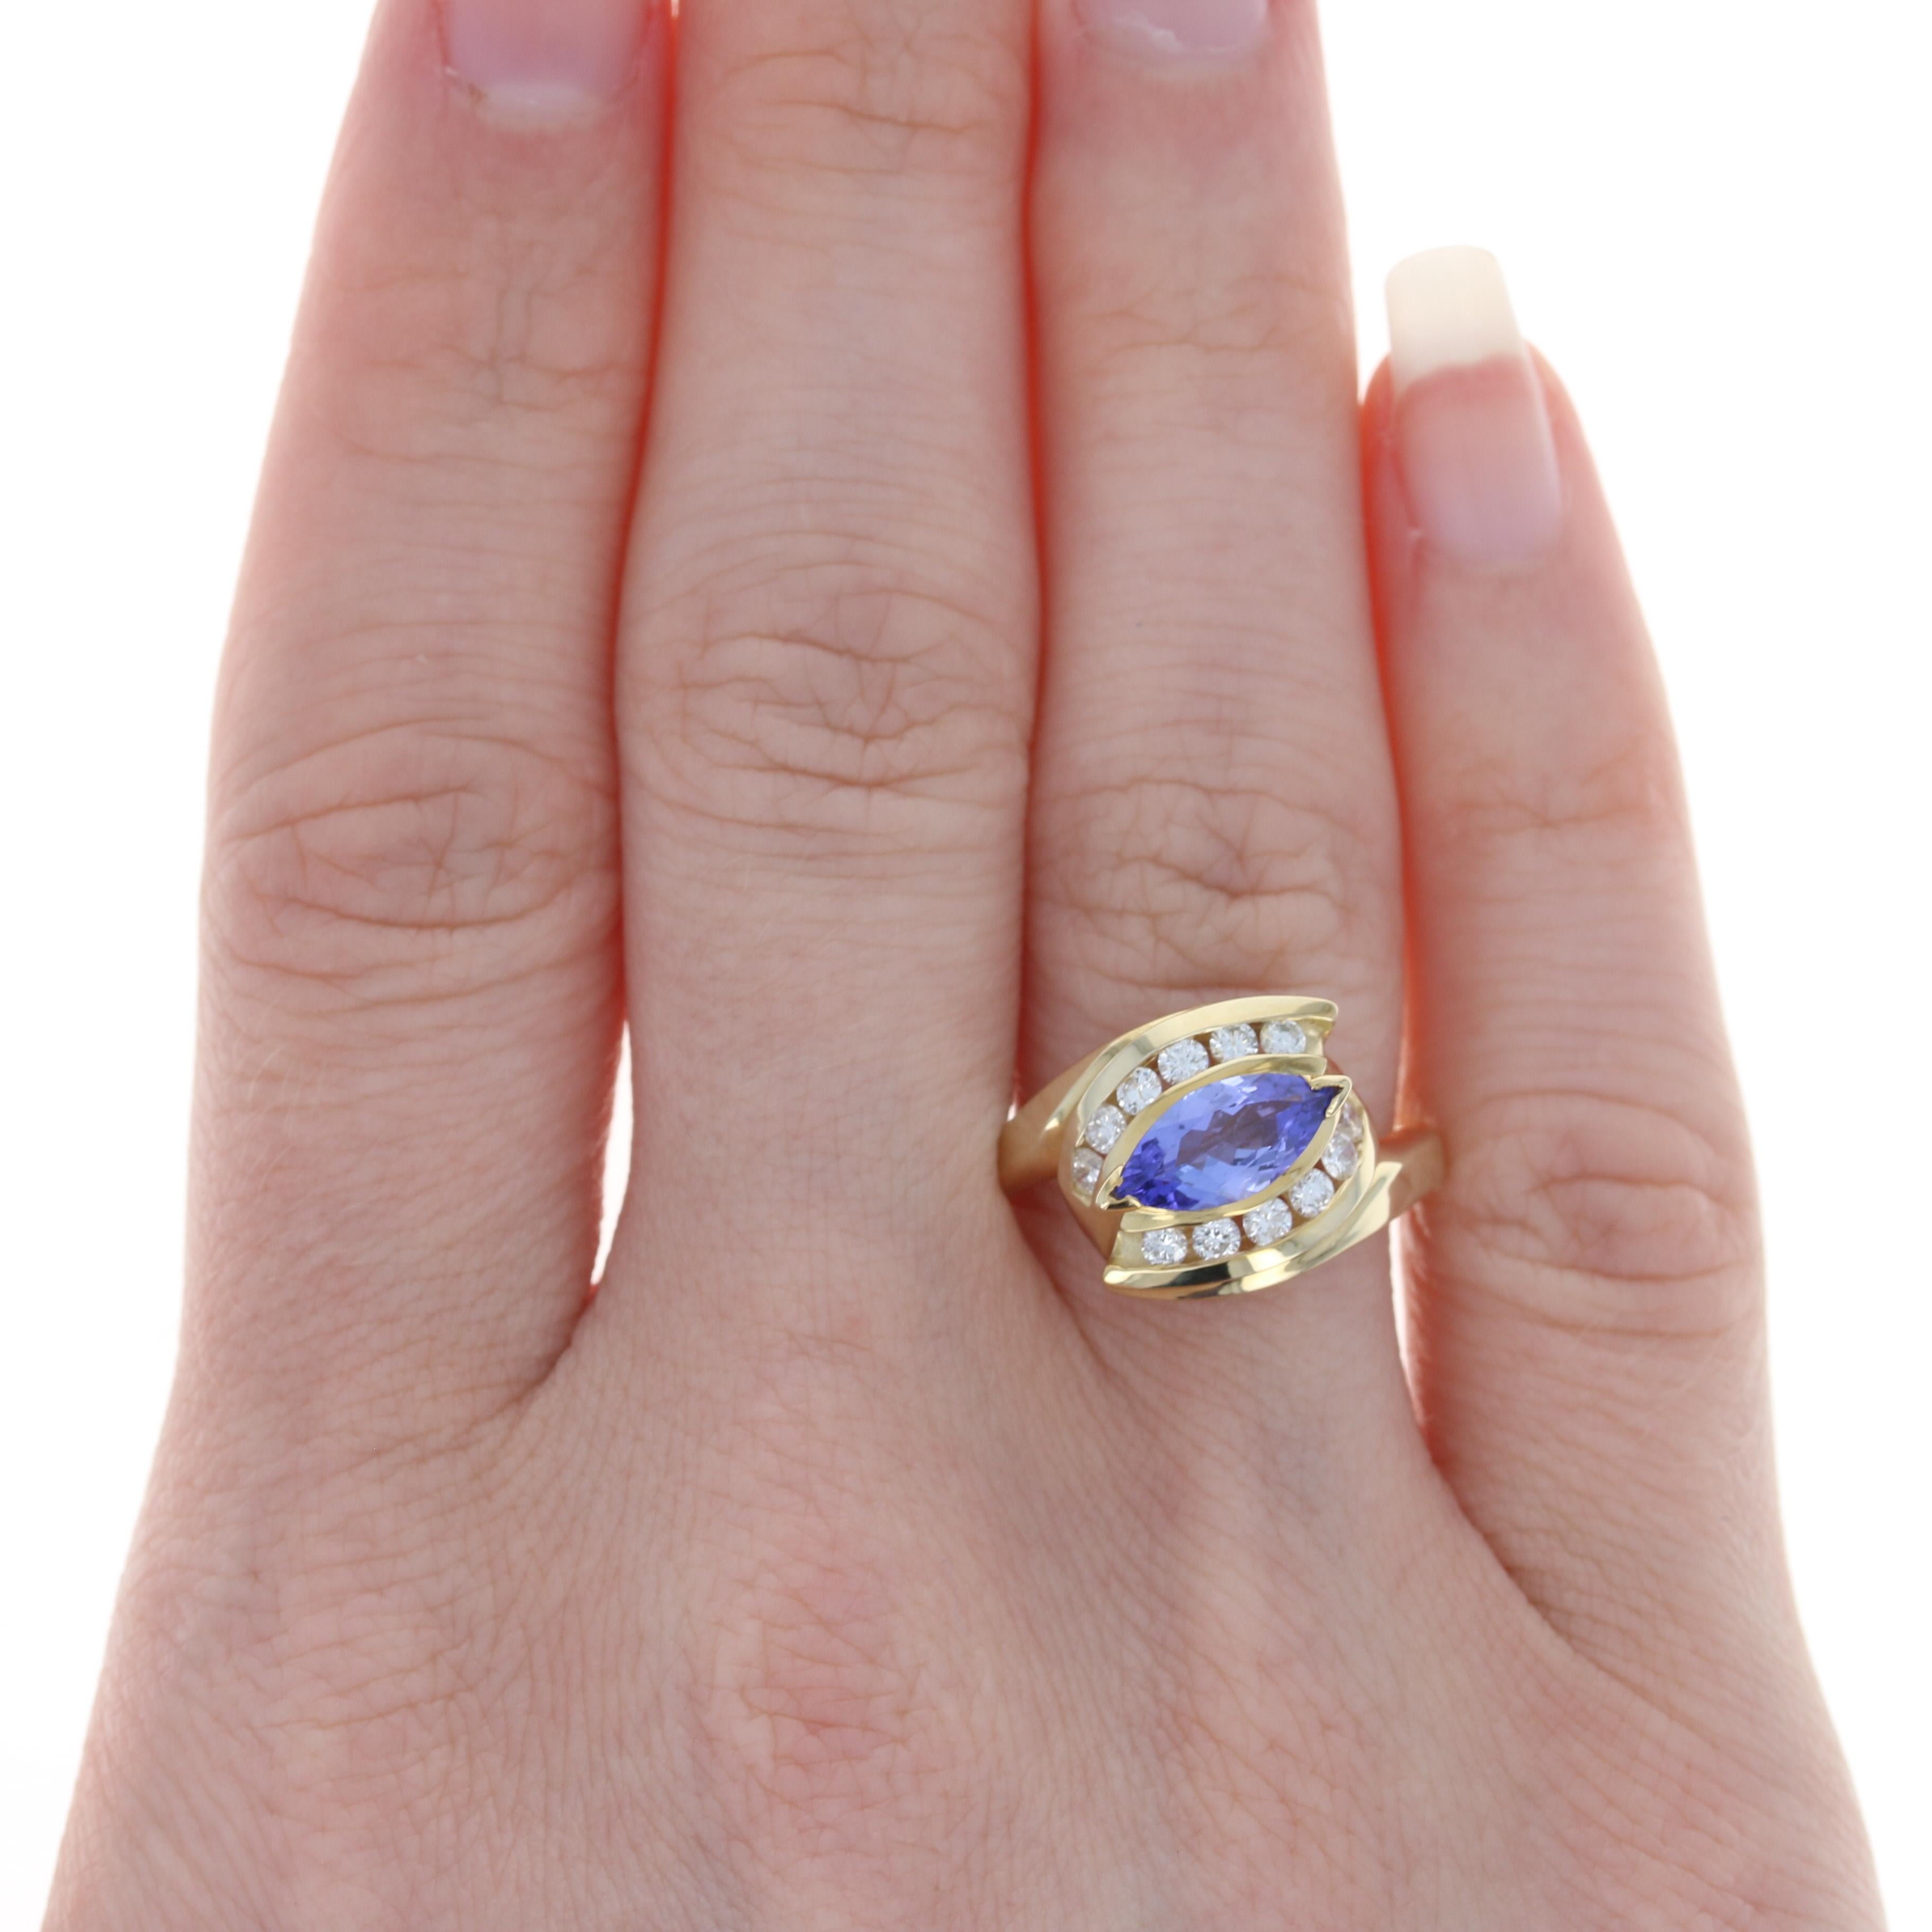 Beautifully crafted in 14k yellow gold, this bypass-style ring showcases a satiny purple tanzanite that is highlighted by a shimmering swirl of icy white diamond accents set around the solitaire. This radiant piece would also make a cherished